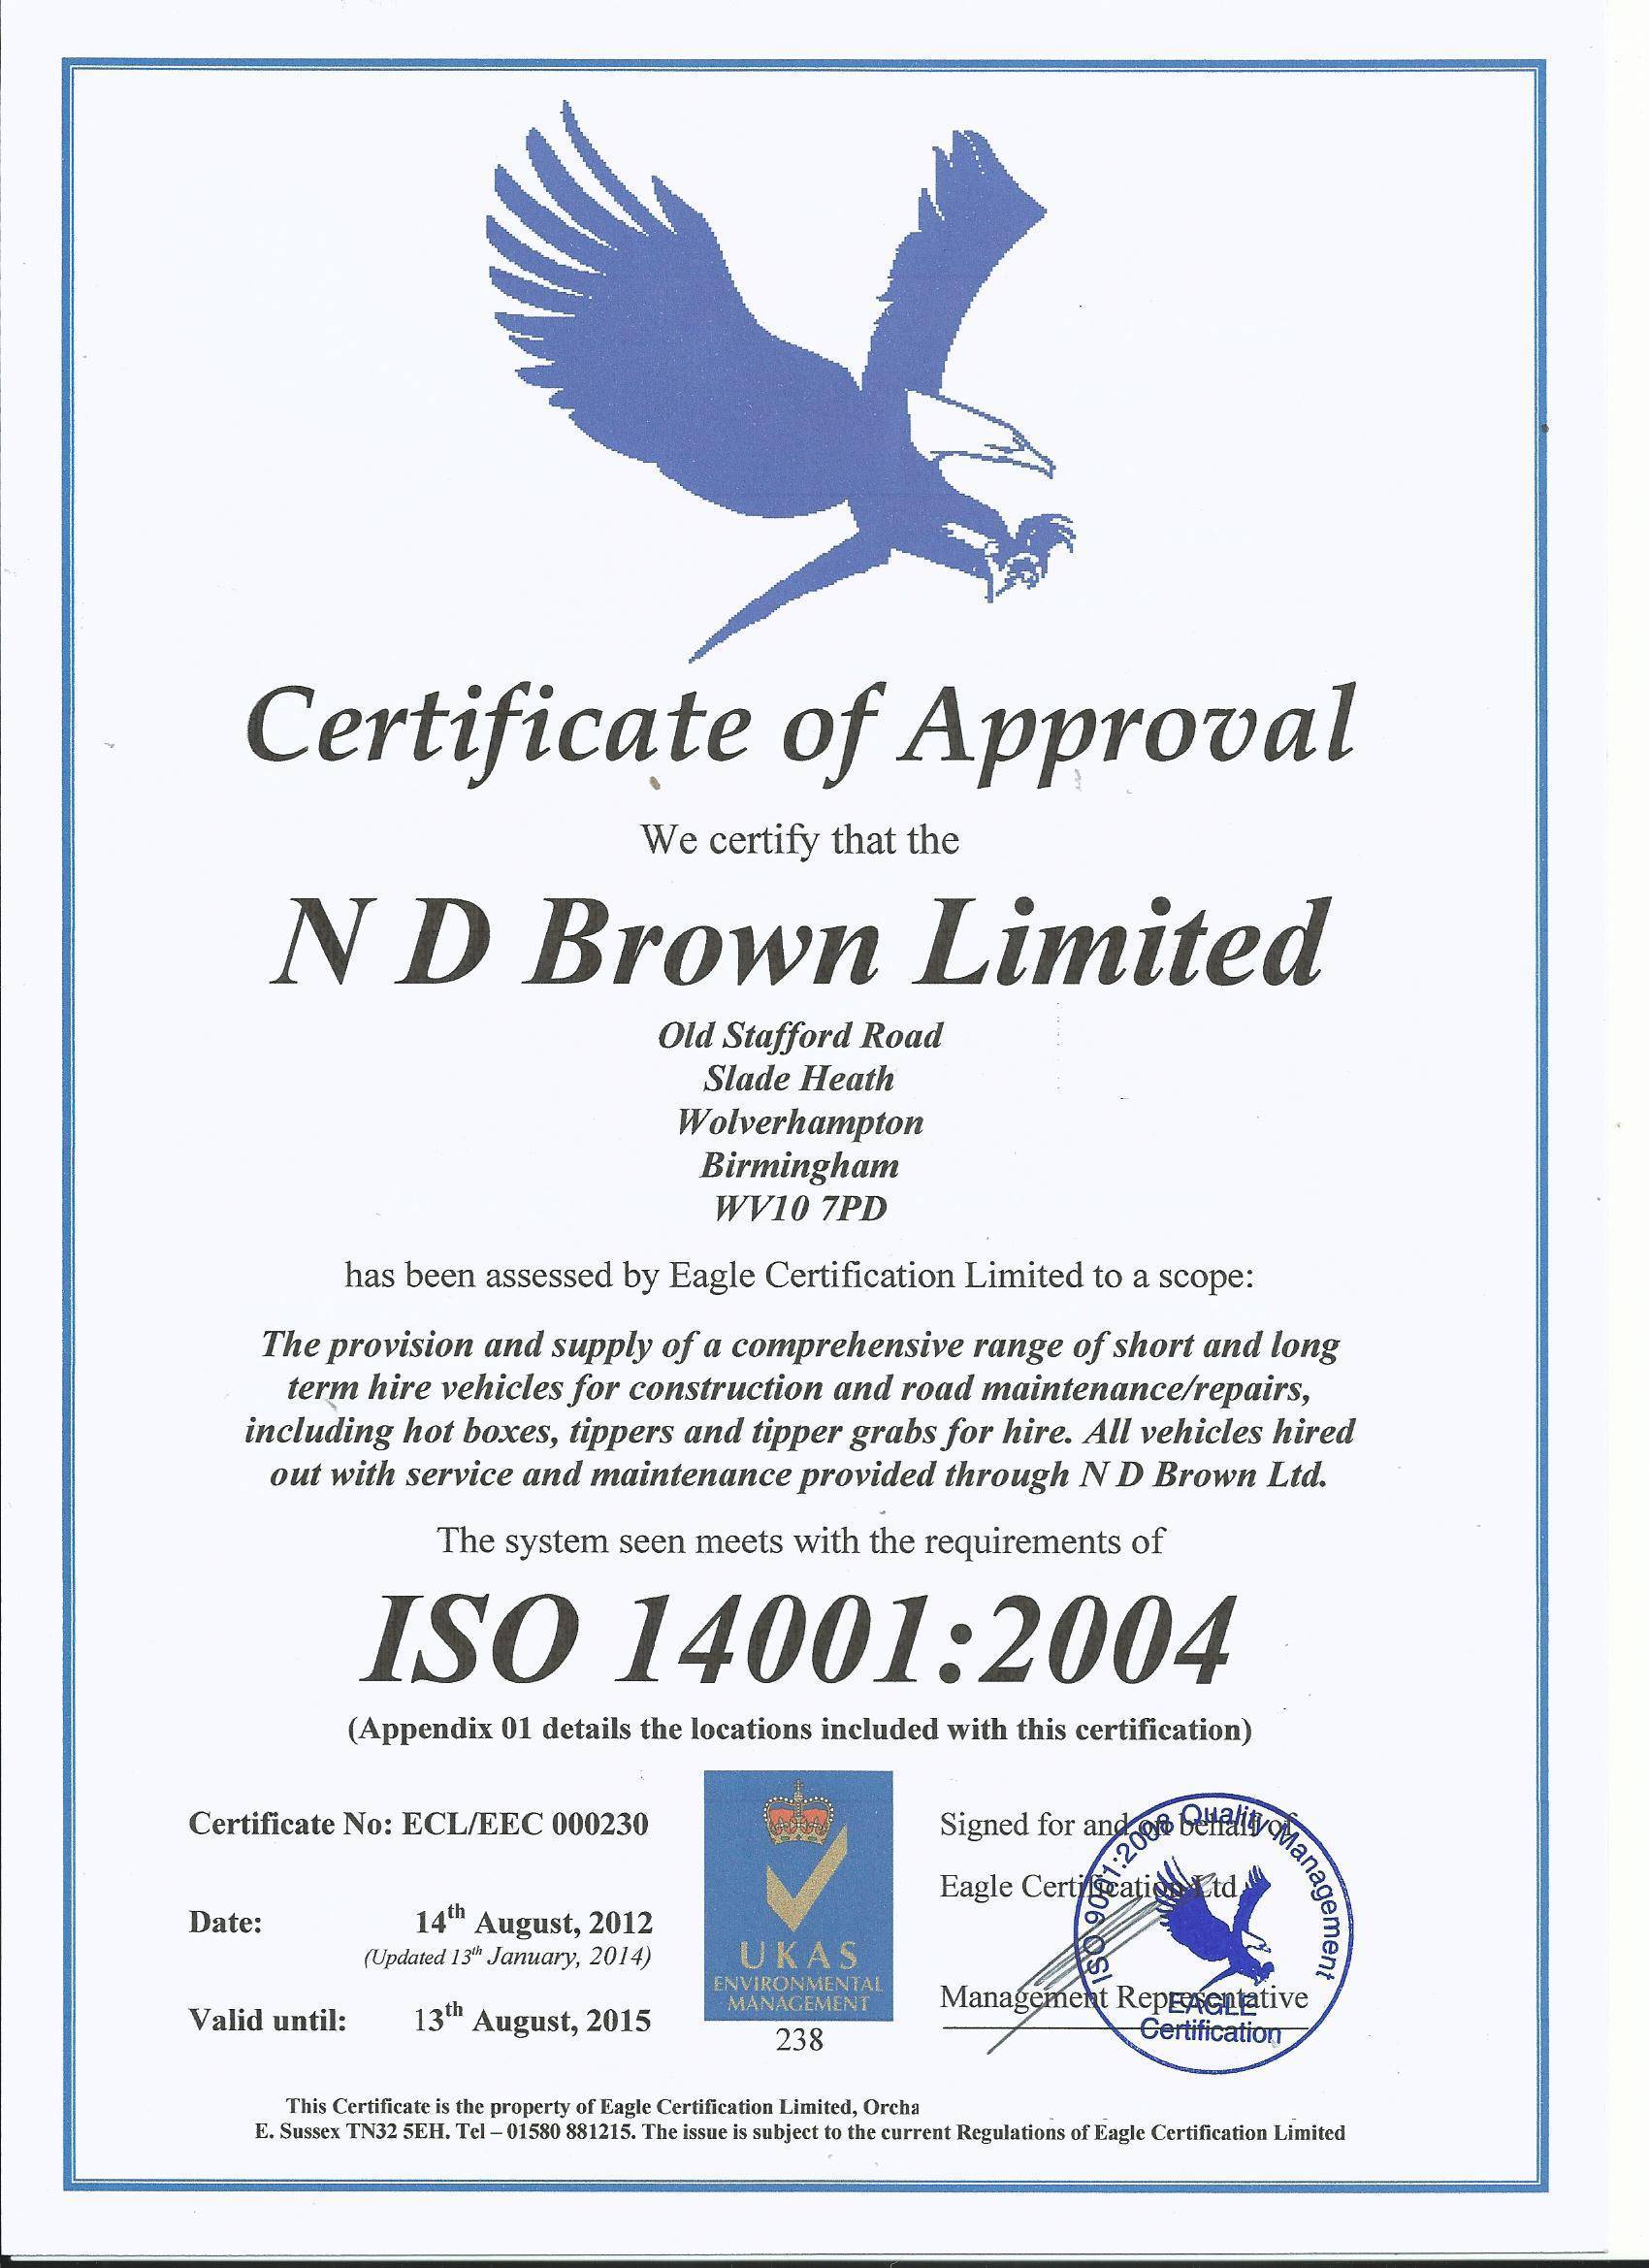 ISO 14001:2001 Accreditation Certificate for ND Brown